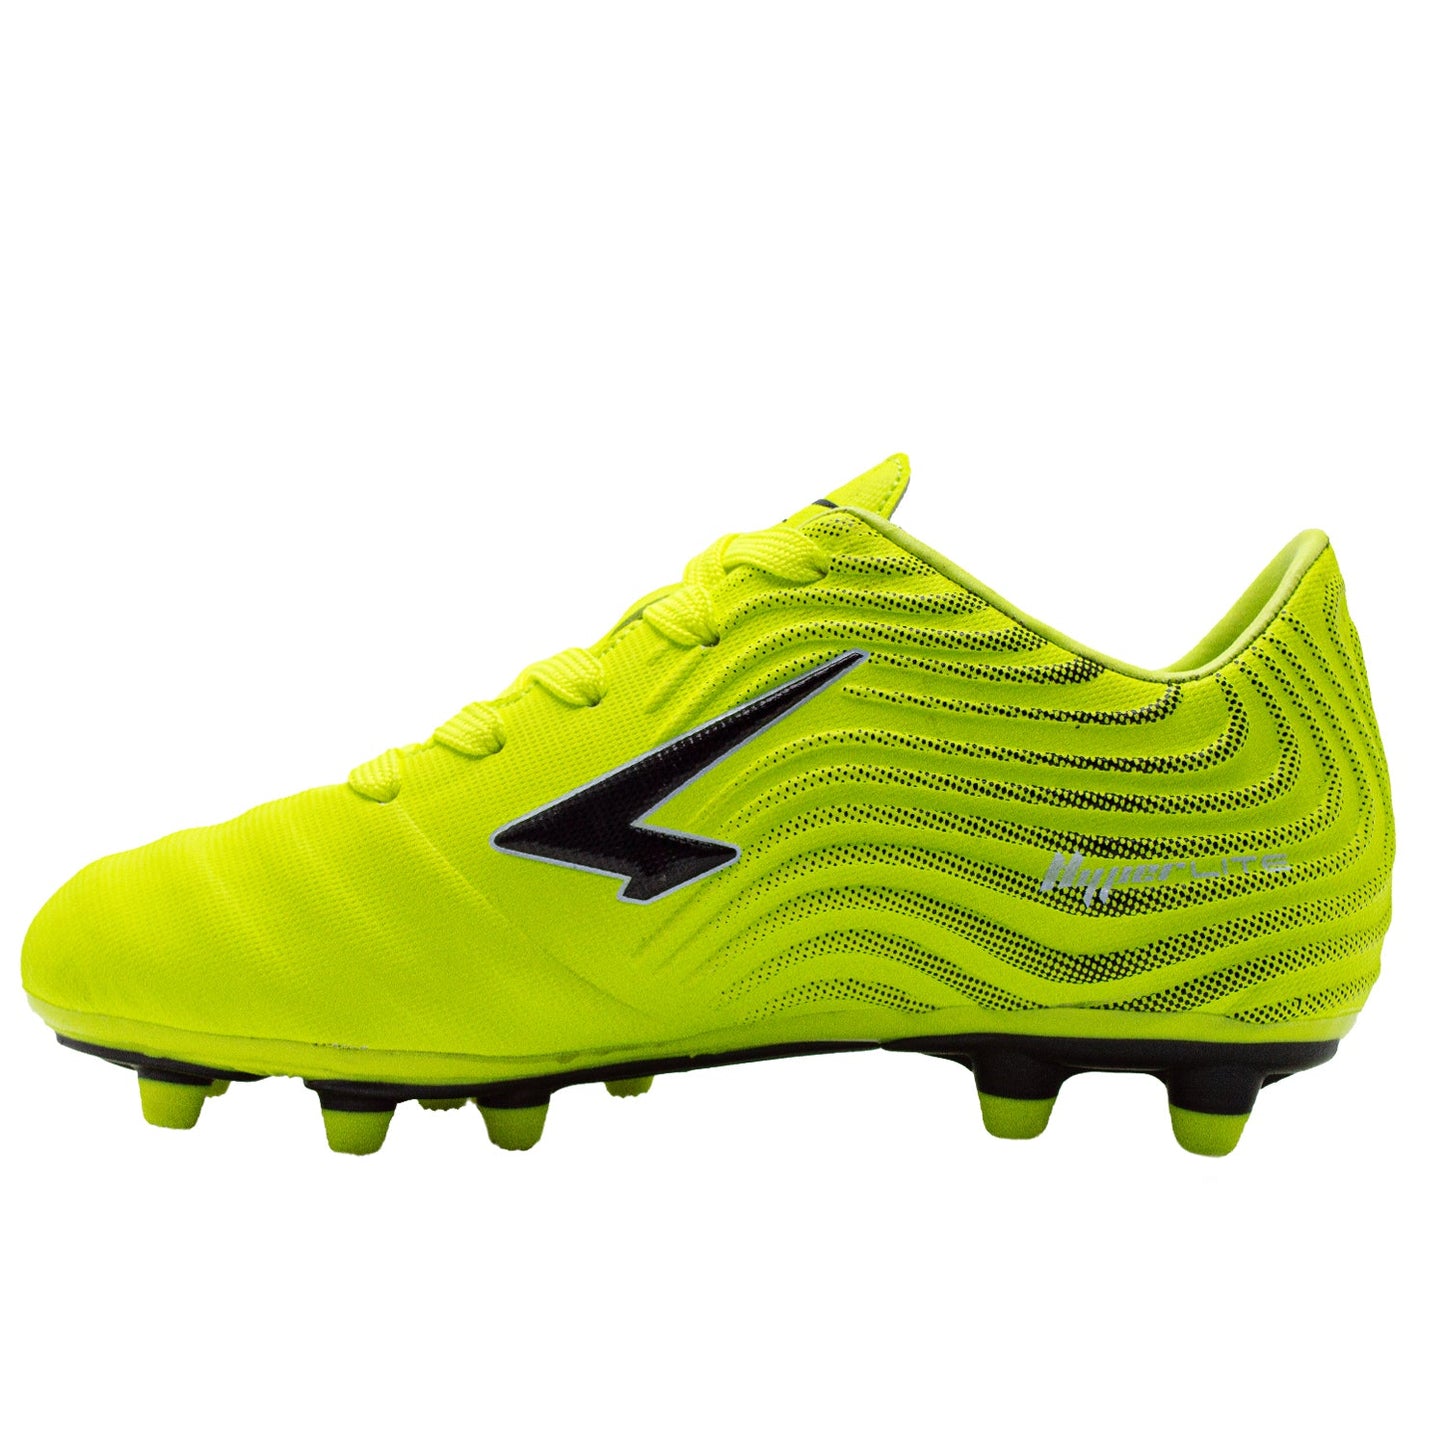 Swell Junior Football Boots - Lime/Black